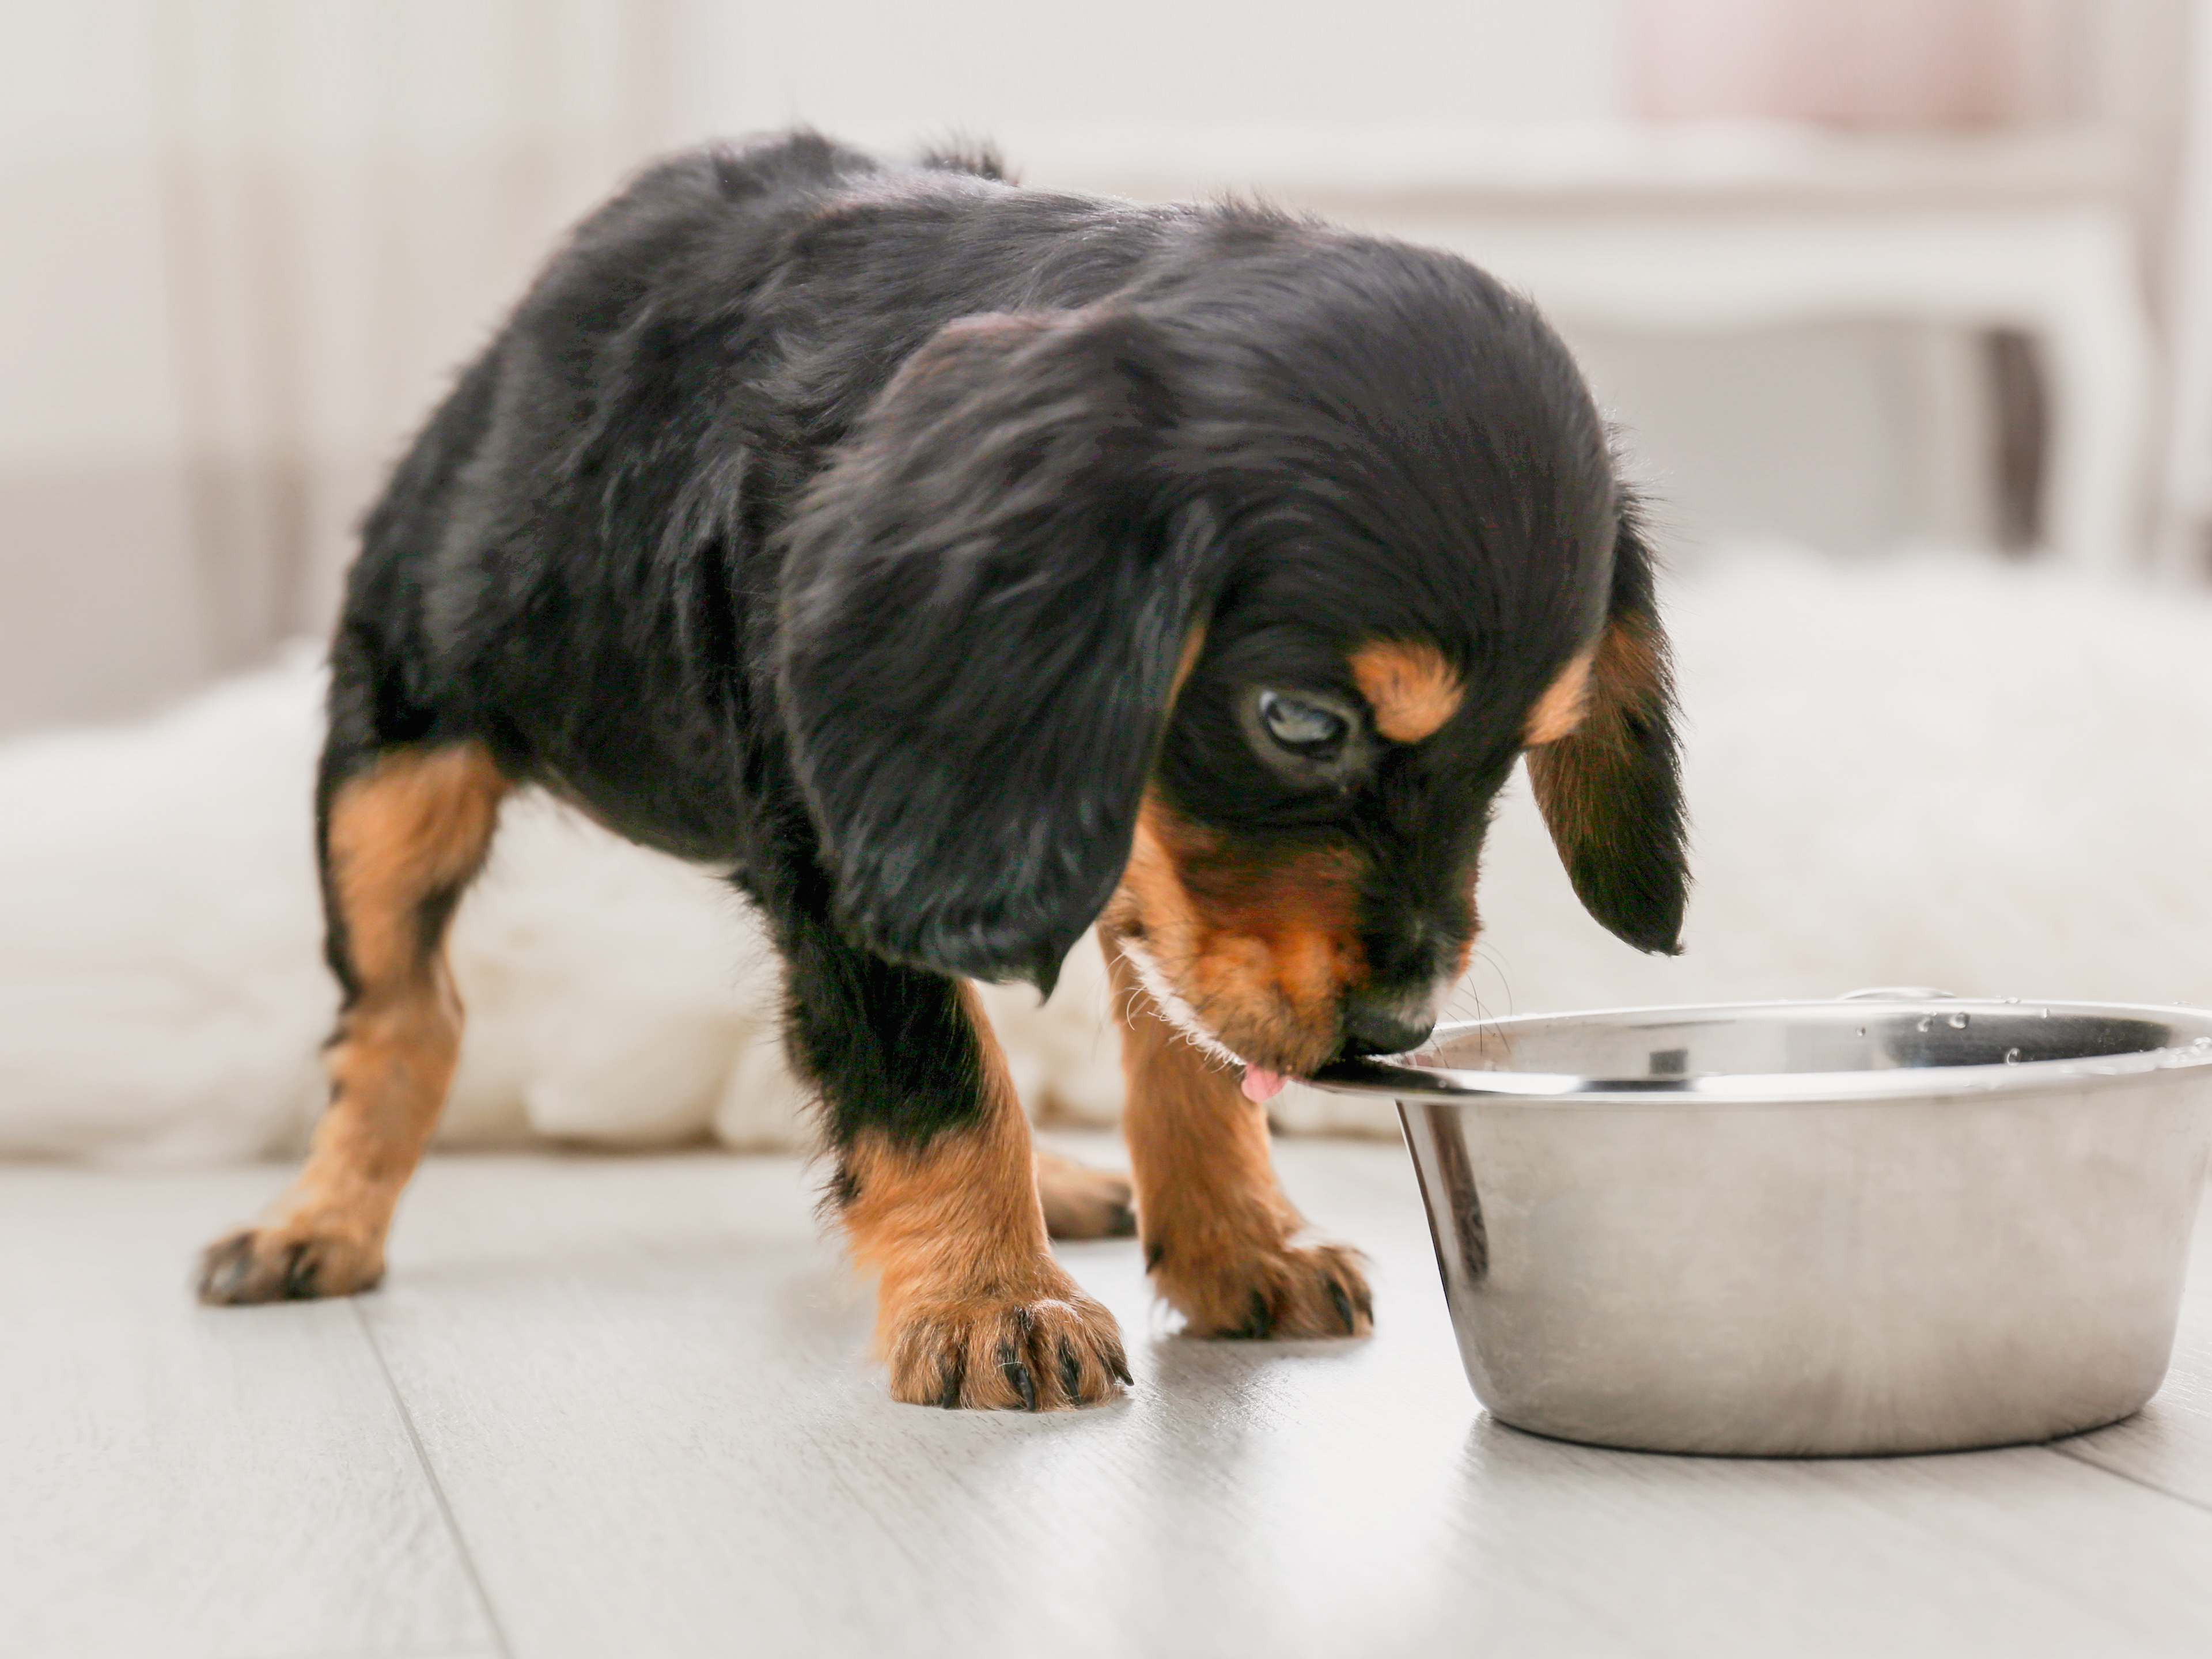 English Cocker Spaniel standing on at tile floor sniffing a stainless steel bowl